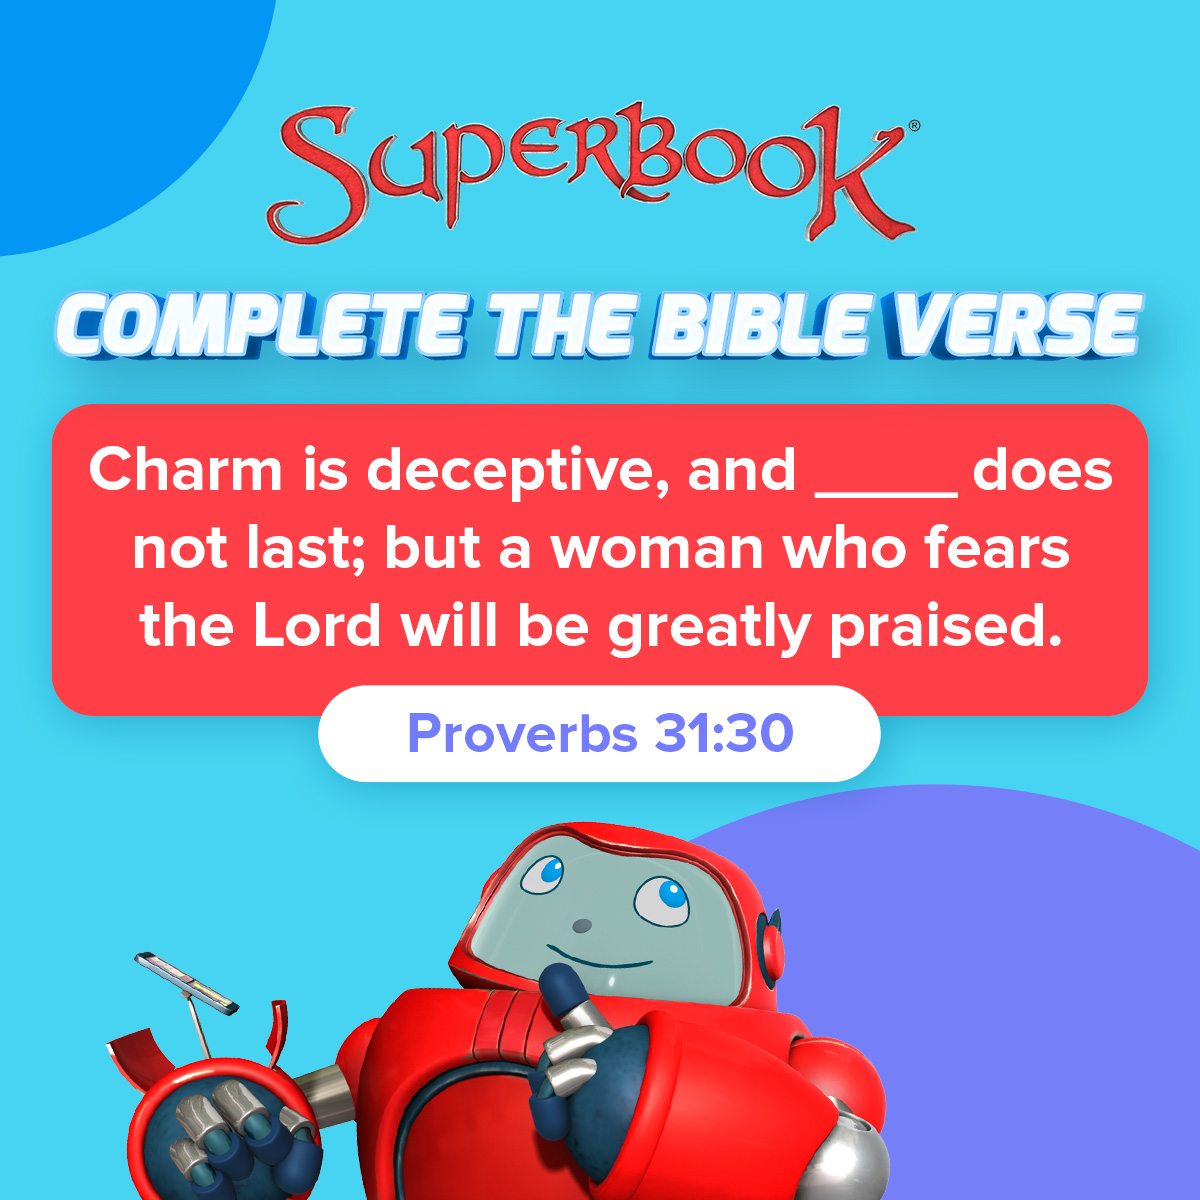 'SupERBOOK COMPLETE THE BIBLE VERSE Charm is deceptive, and does not last; but a woman who fears the Lord will be greatly praised. Proverbs 31:30'